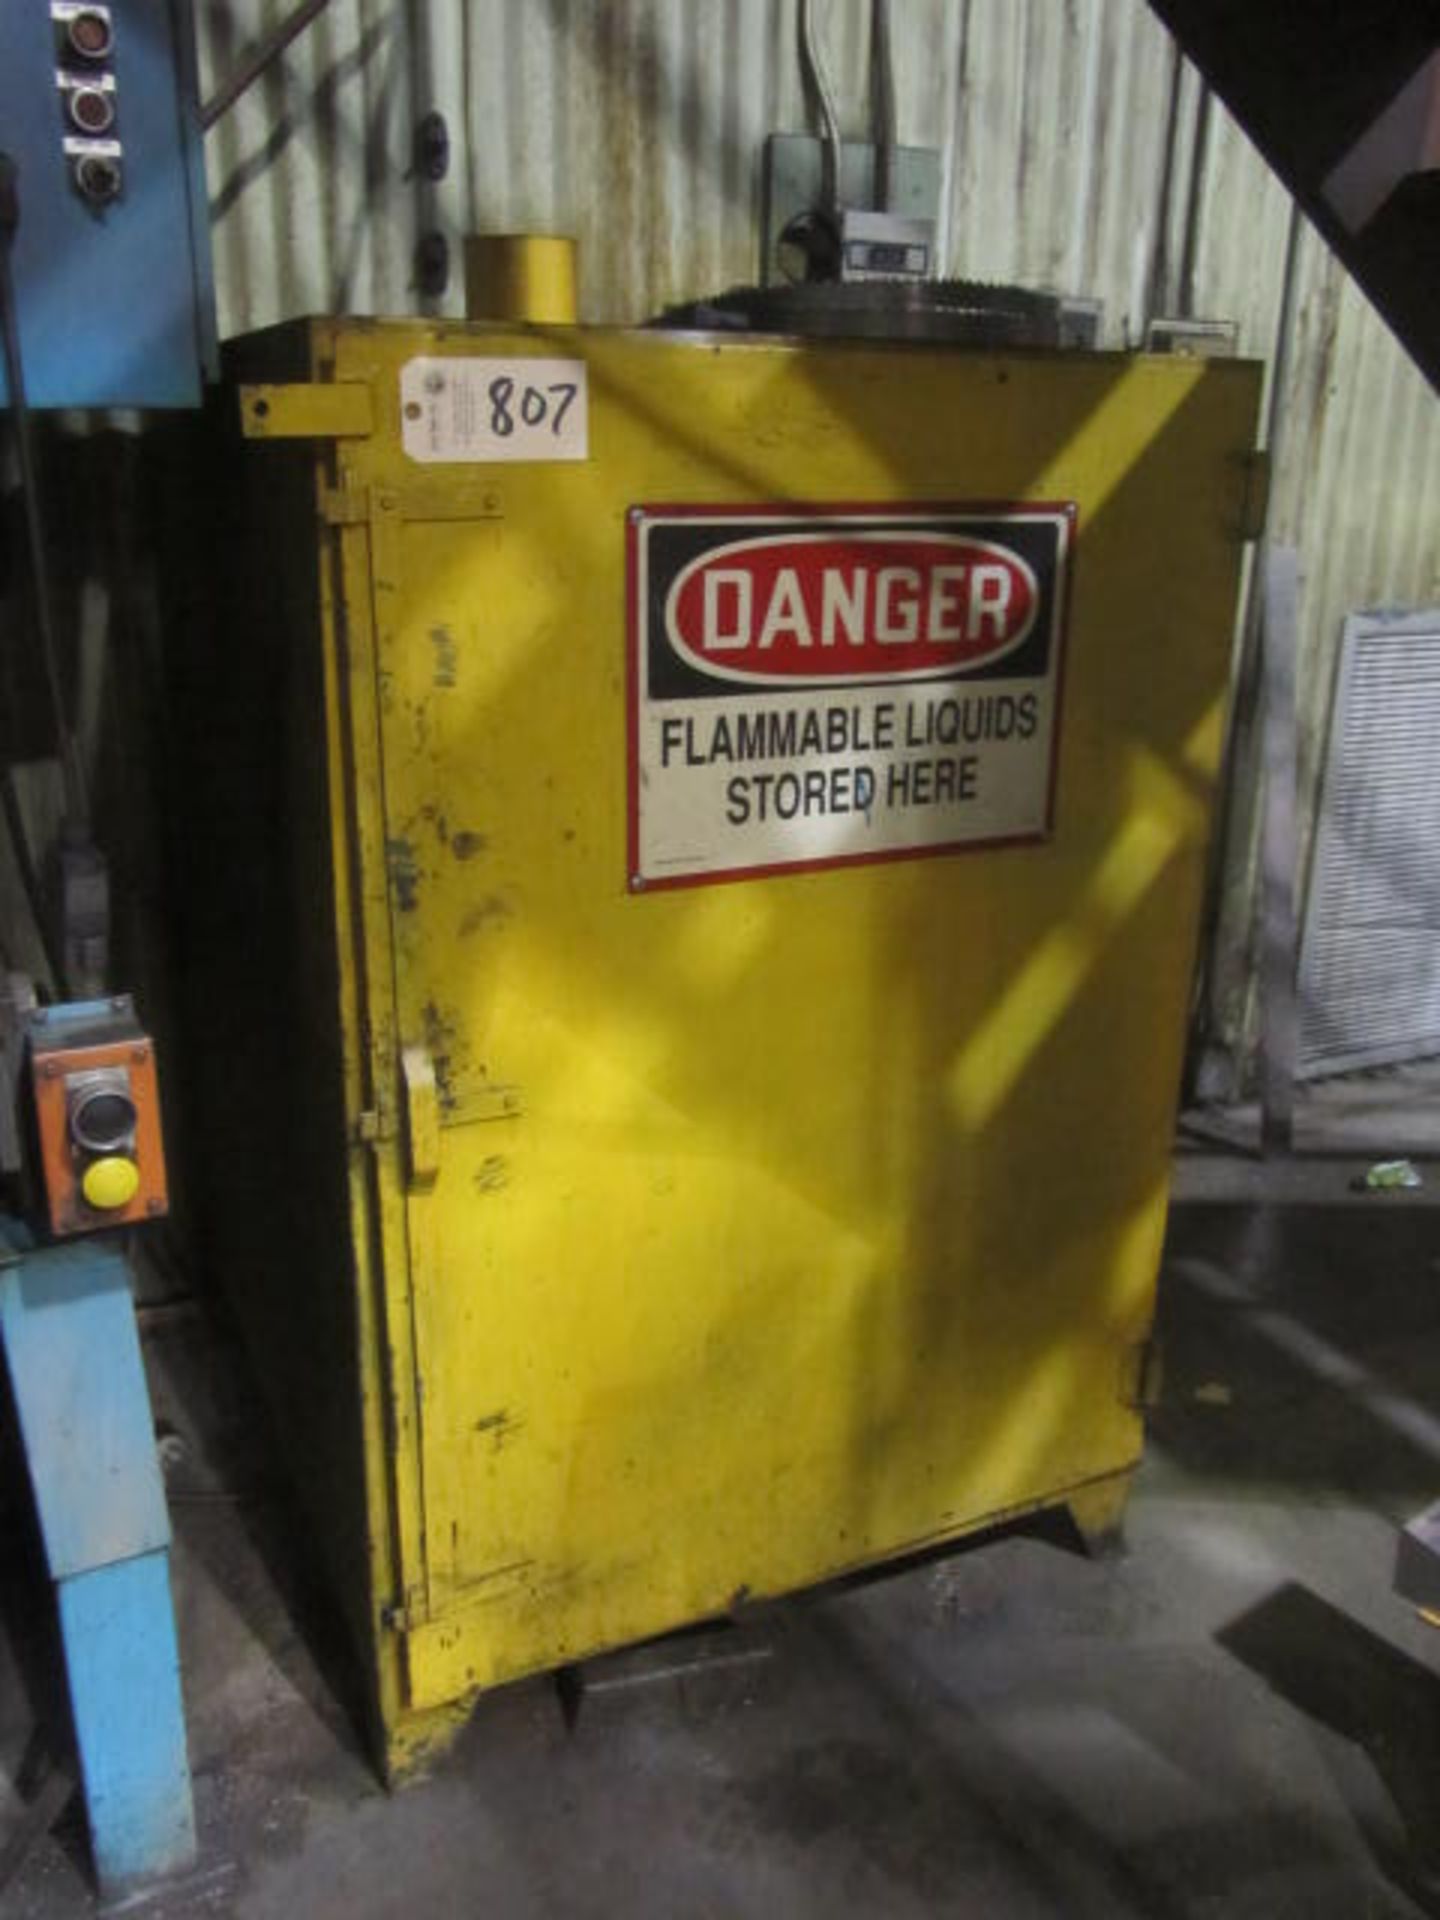 Flammable Cabinet